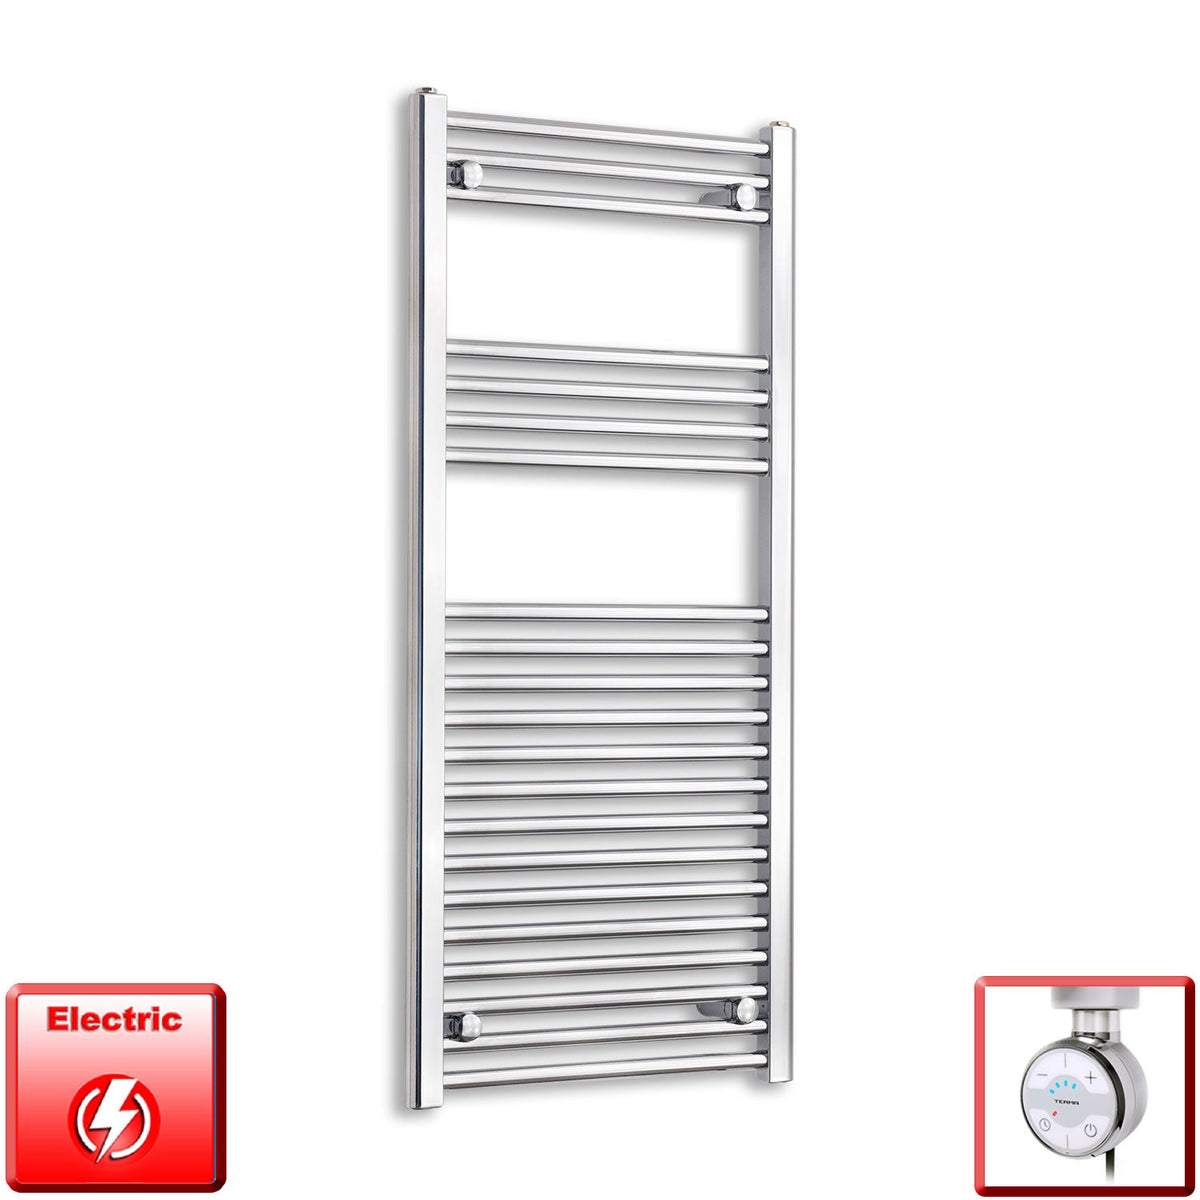 600mm Wide 1100mm High Pre-Filled Chrome Electric Towel Rail Radiator With Thermostatic MOA Element